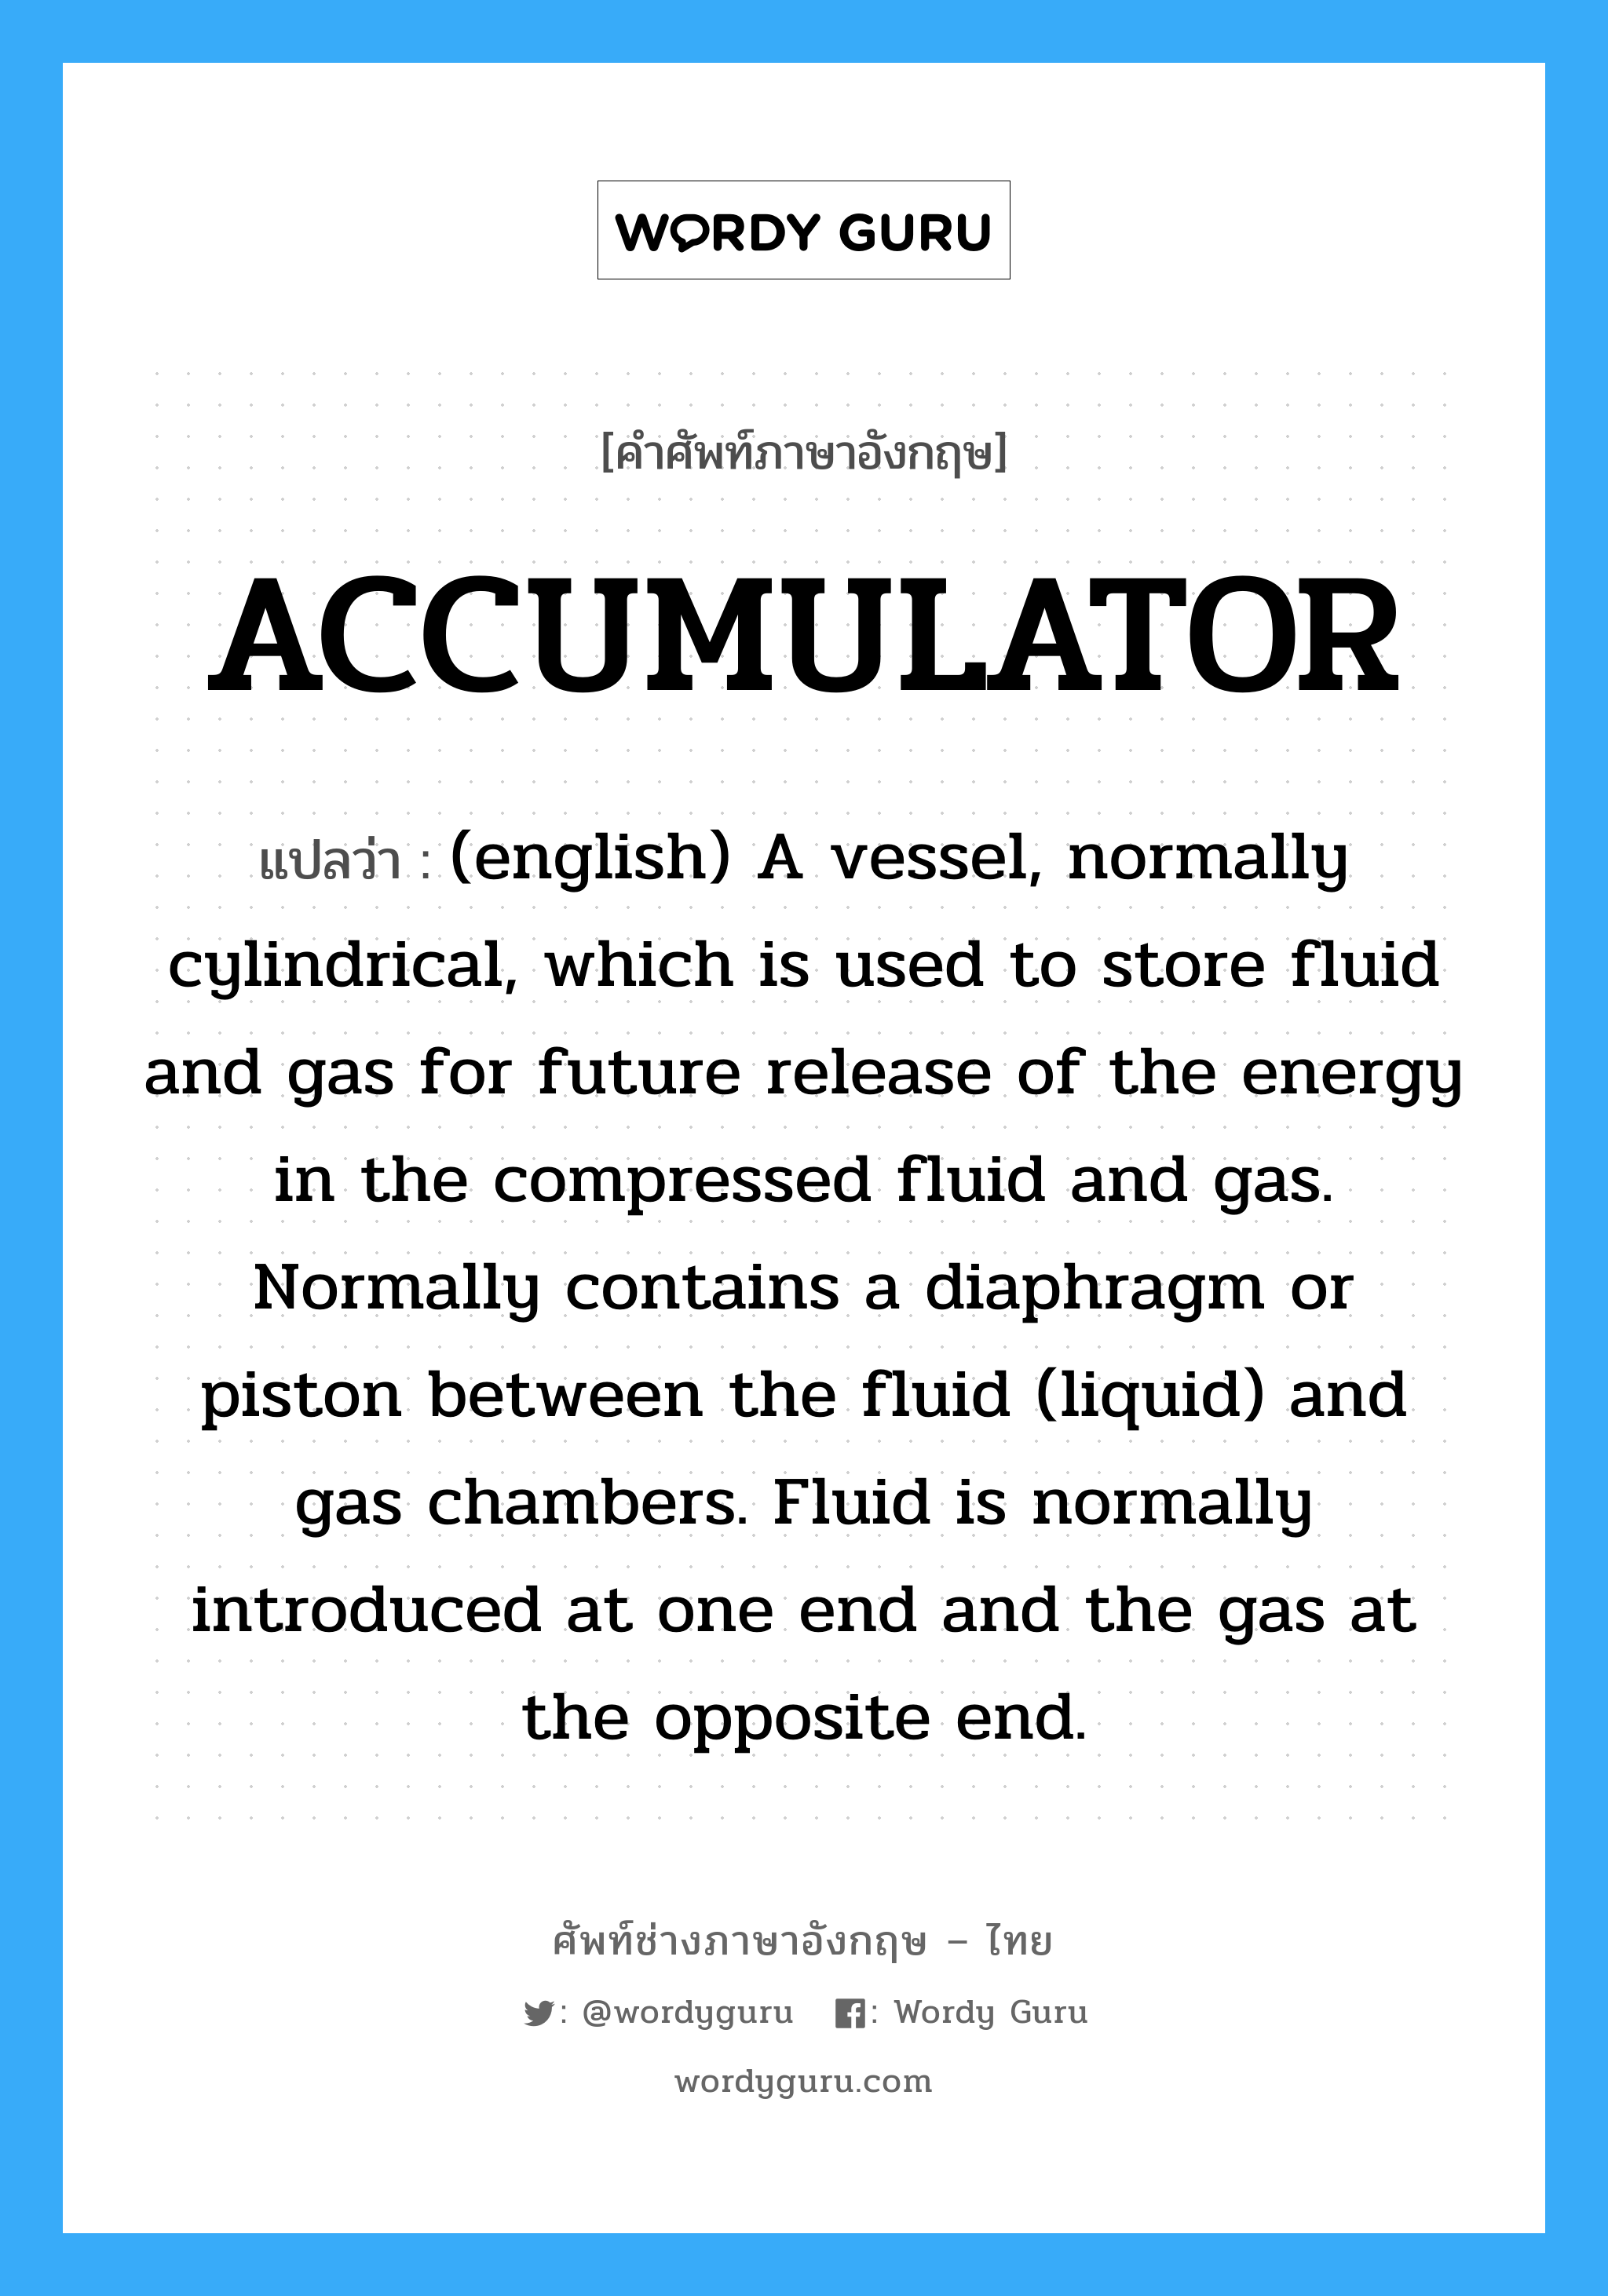 ACCUMULATOR แปลว่า?, คำศัพท์ช่างภาษาอังกฤษ - ไทย ACCUMULATOR คำศัพท์ภาษาอังกฤษ ACCUMULATOR แปลว่า (english) A vessel, normally cylindrical, which is used to store fluid and gas for future release of the energy in the compressed fluid and gas. Normally contains a diaphragm or piston between the fluid (liquid) and gas chambers. Fluid is normally introduced at one end and the gas at the opposite end.